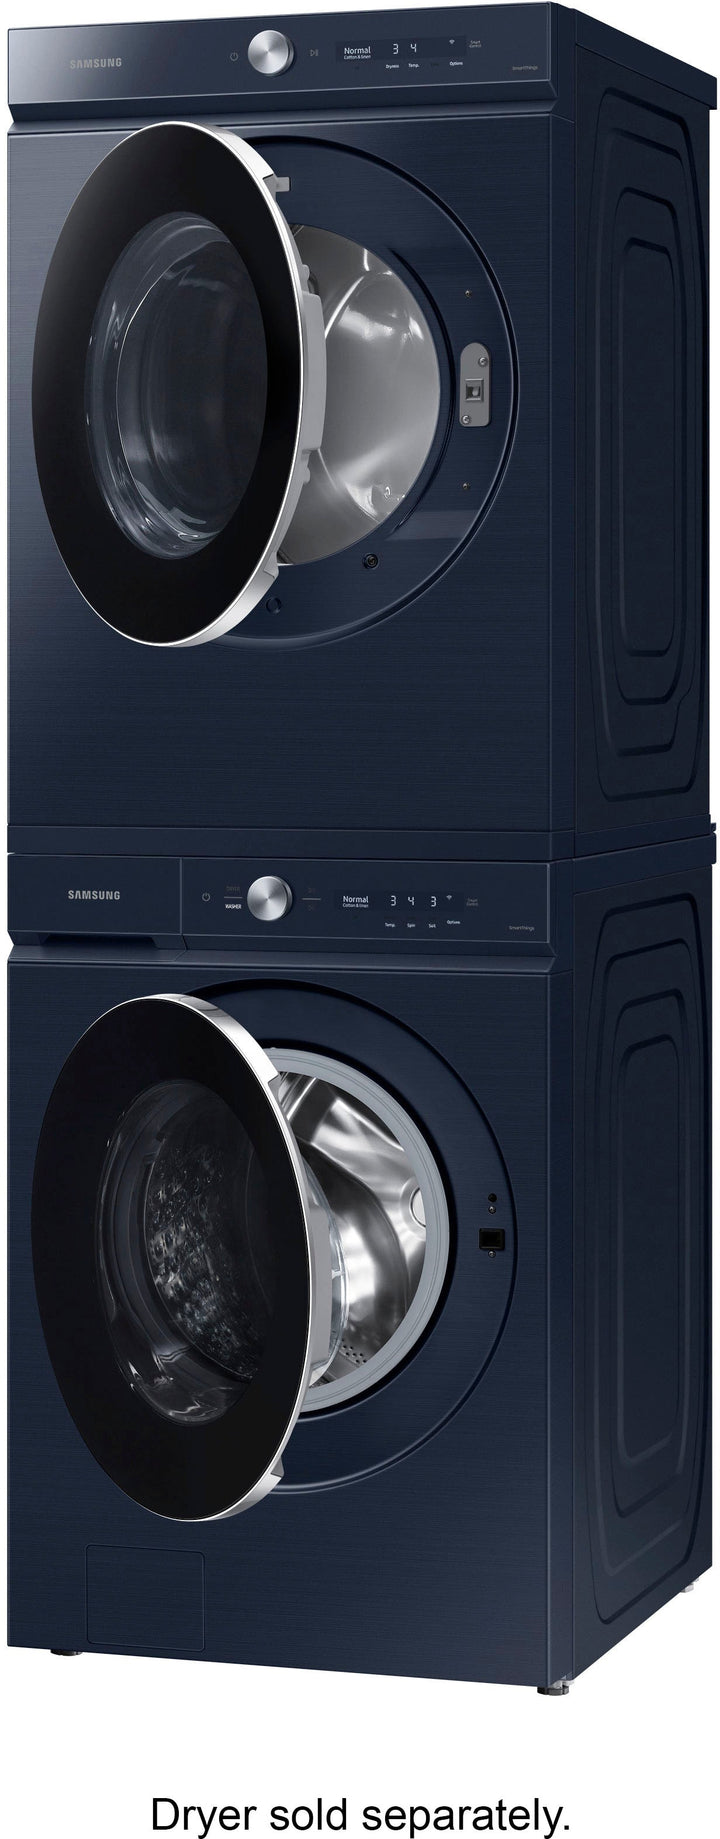 Samsung - Bespoke 5.3 cu. ft. Ultra Capacity Front Load Washer with AI OptiWash and Auto Dispense - Brushed navy_9